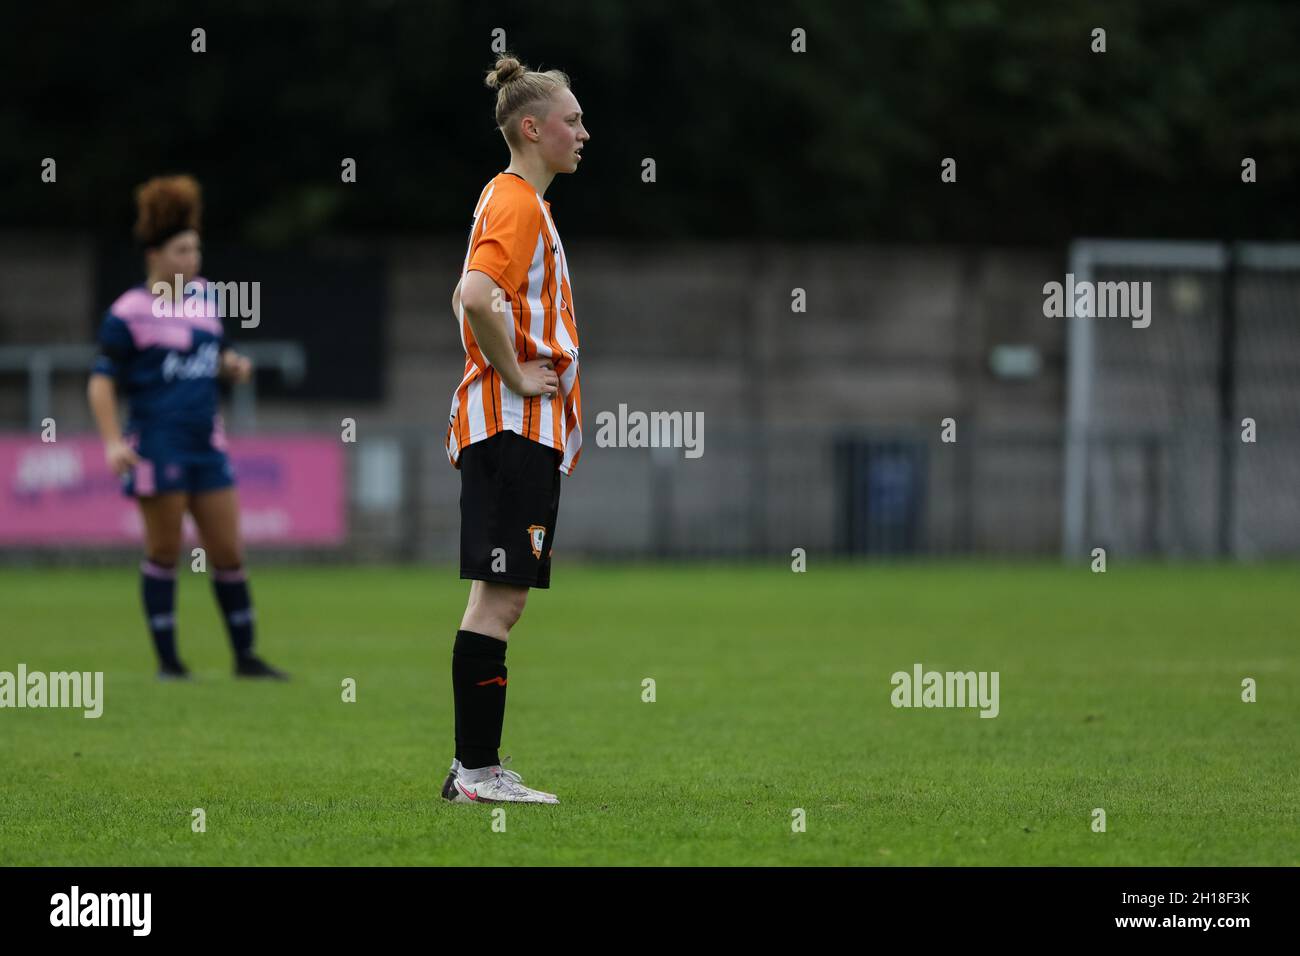 London, UK. 17th Oct, 2021. London, England, October 17th 20 Rozalia Sitarz (2 Ashford) at the London and South East Regional Womens Premier game between Dulwich Hamlet and Ashford at Champion Hill in London, England. Liam Asman/SPP Credit: SPP Sport Press Photo. /Alamy Live News Stock Photo